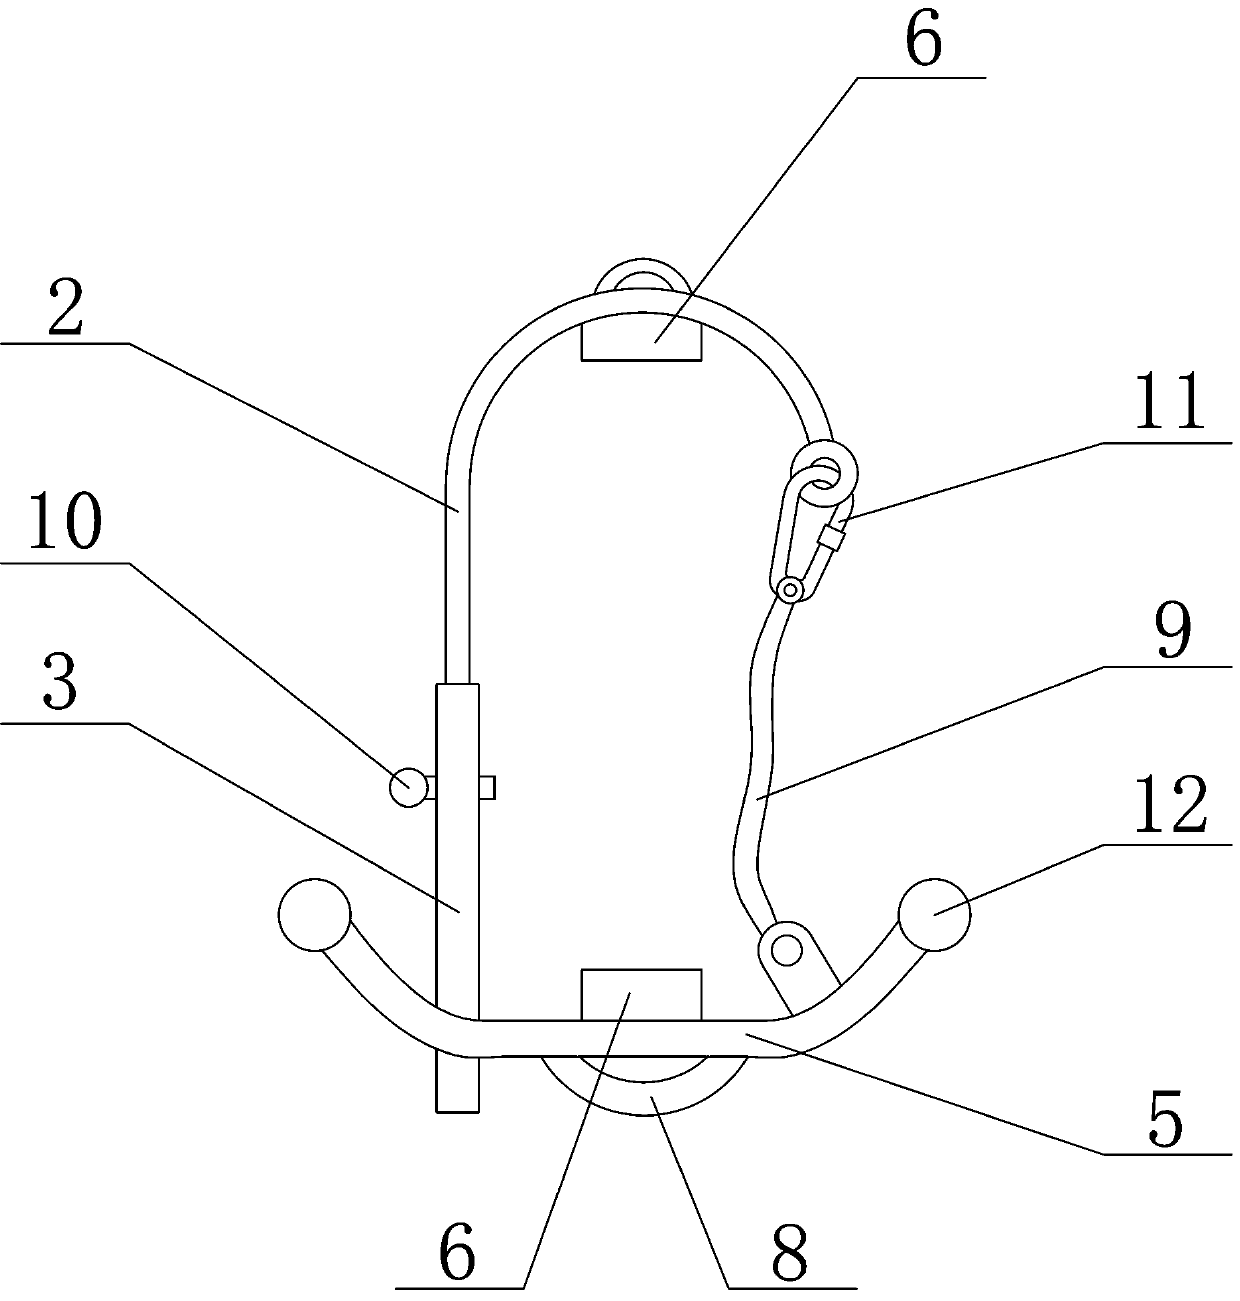 Fall protection device beneficial for pole climbing or tree climbing operation